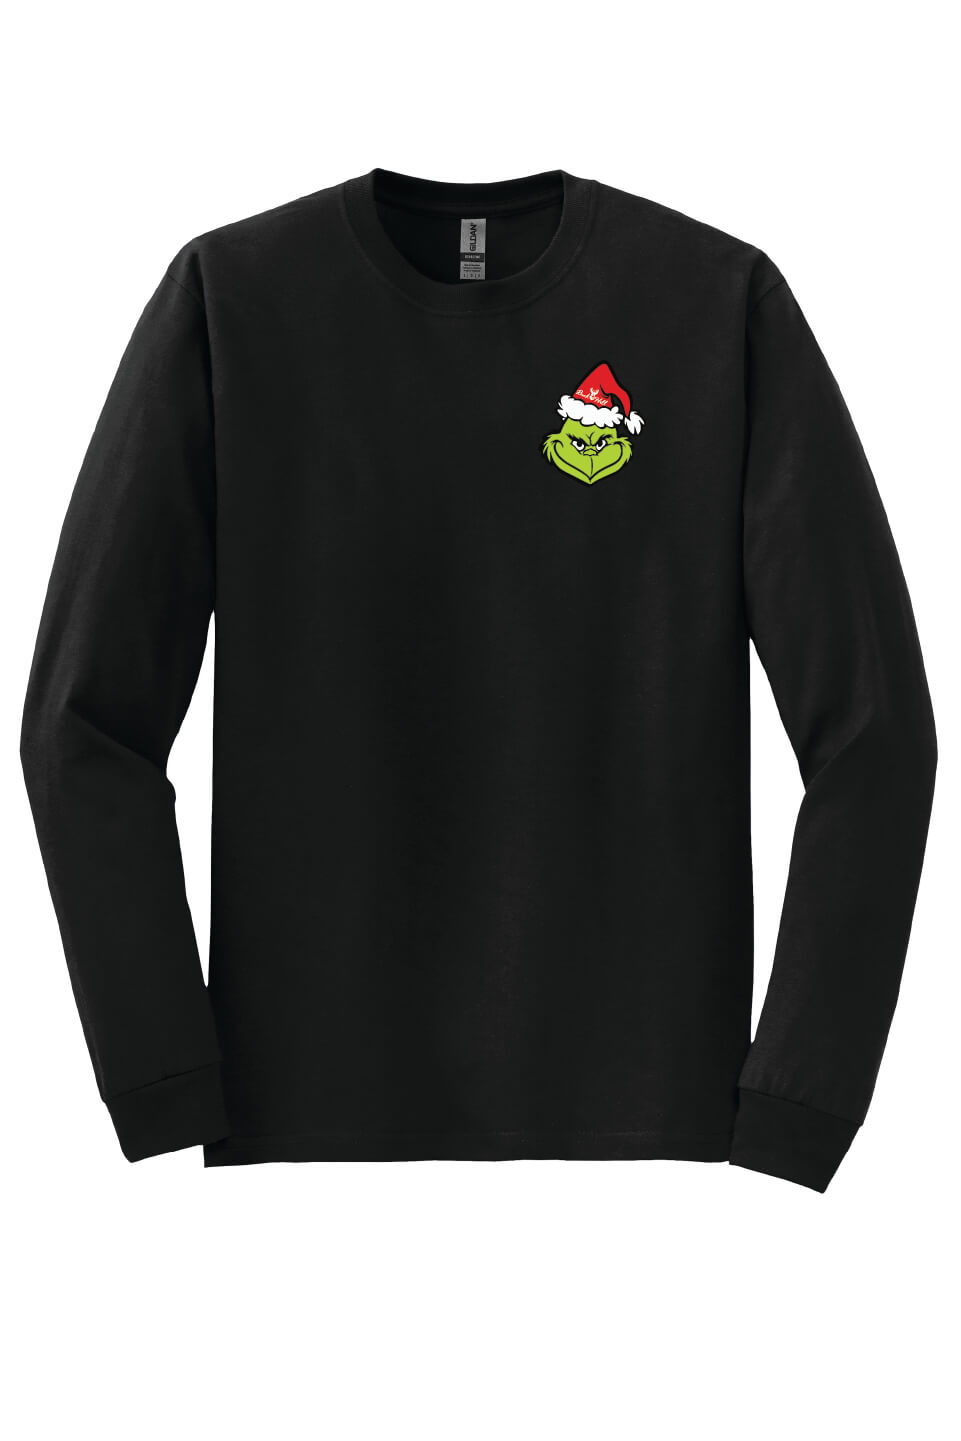 Grinch long sleeve front